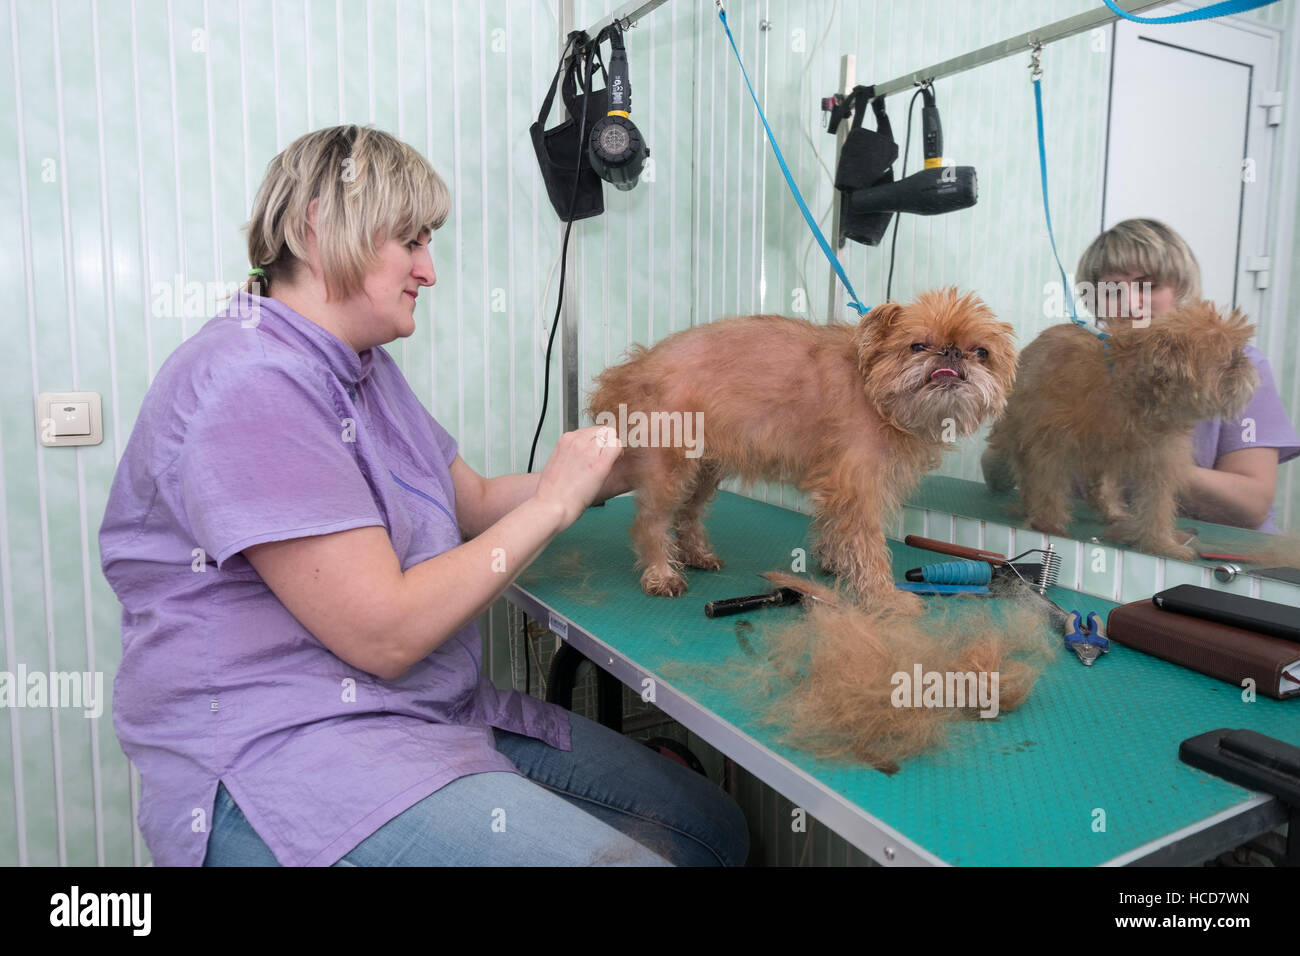 Woman groomer makes trimming Brussels Griffon Stock Photo